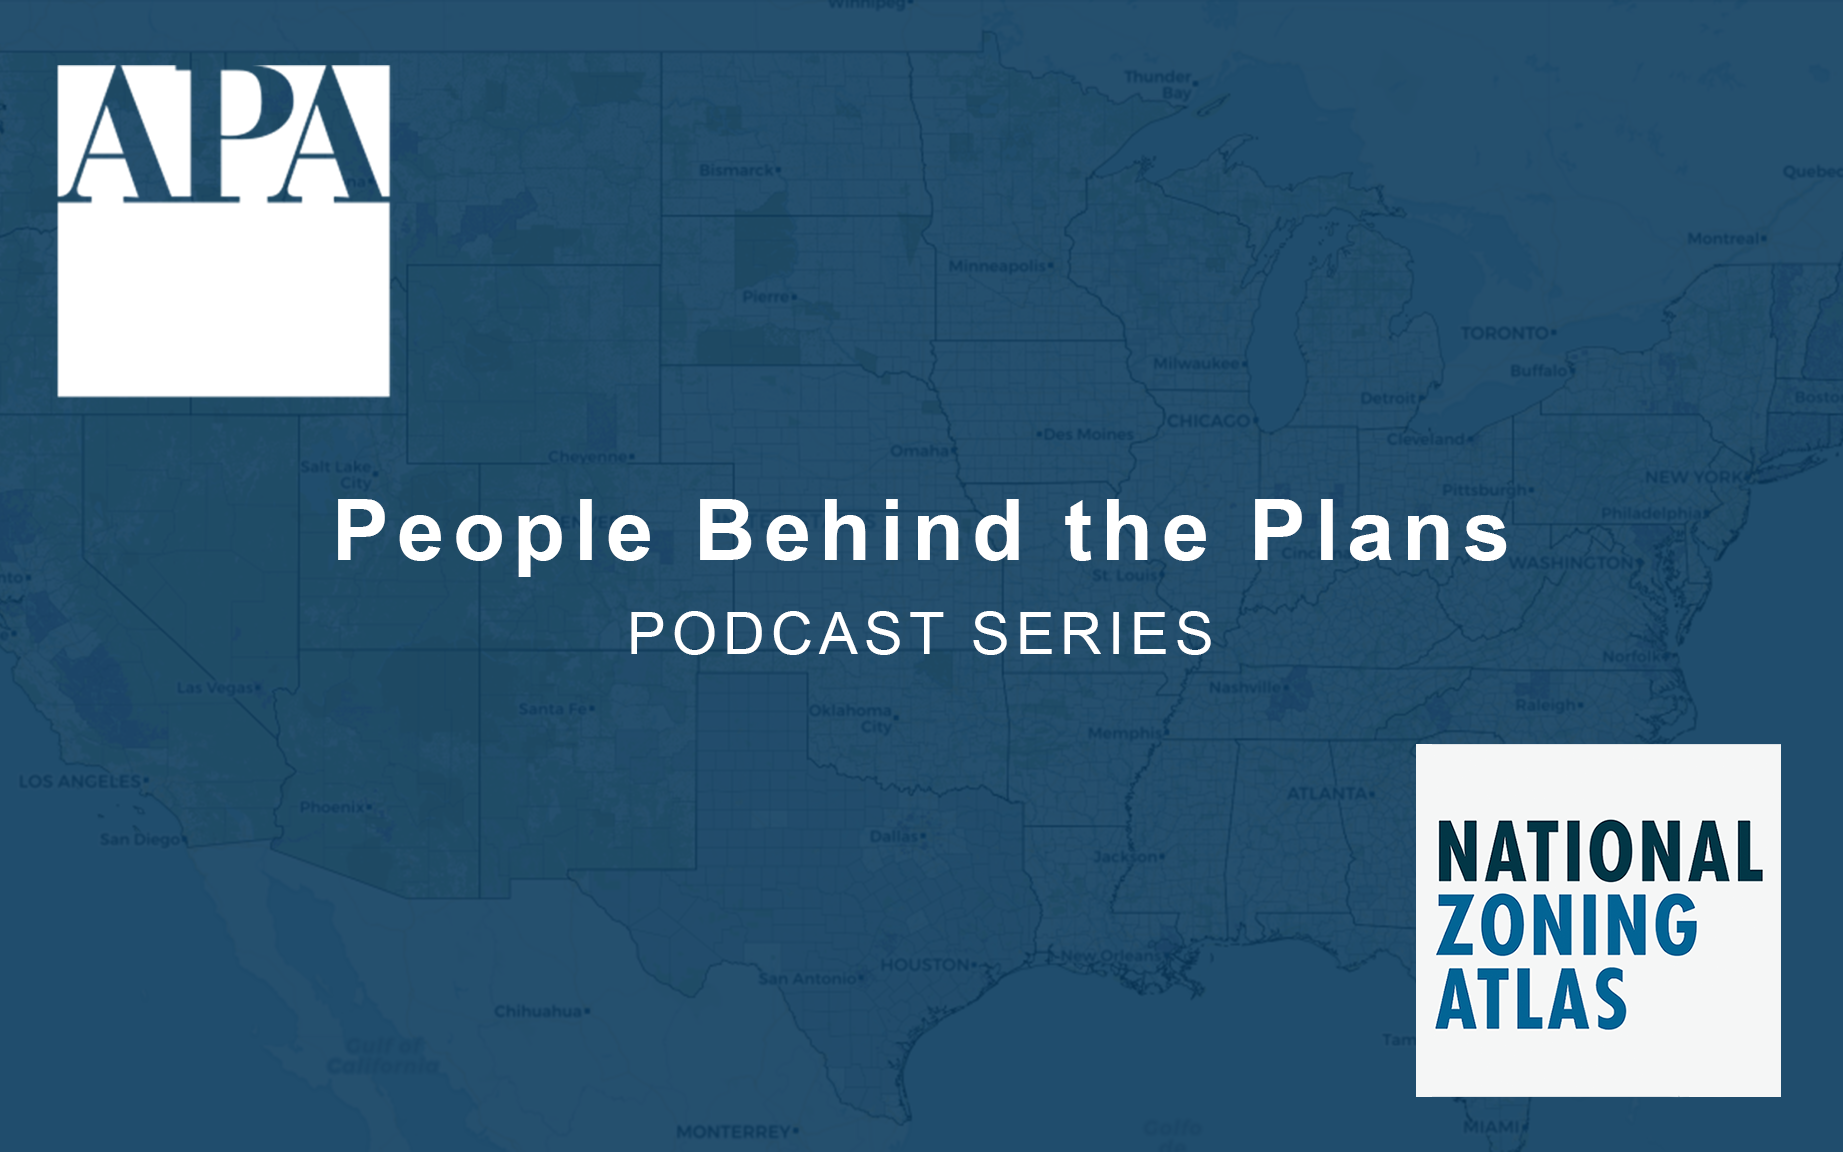 American Planning Association Logo and National Zoning Atlas logo on blue background and title which reads "People Behind the Plans, Podcast Series"